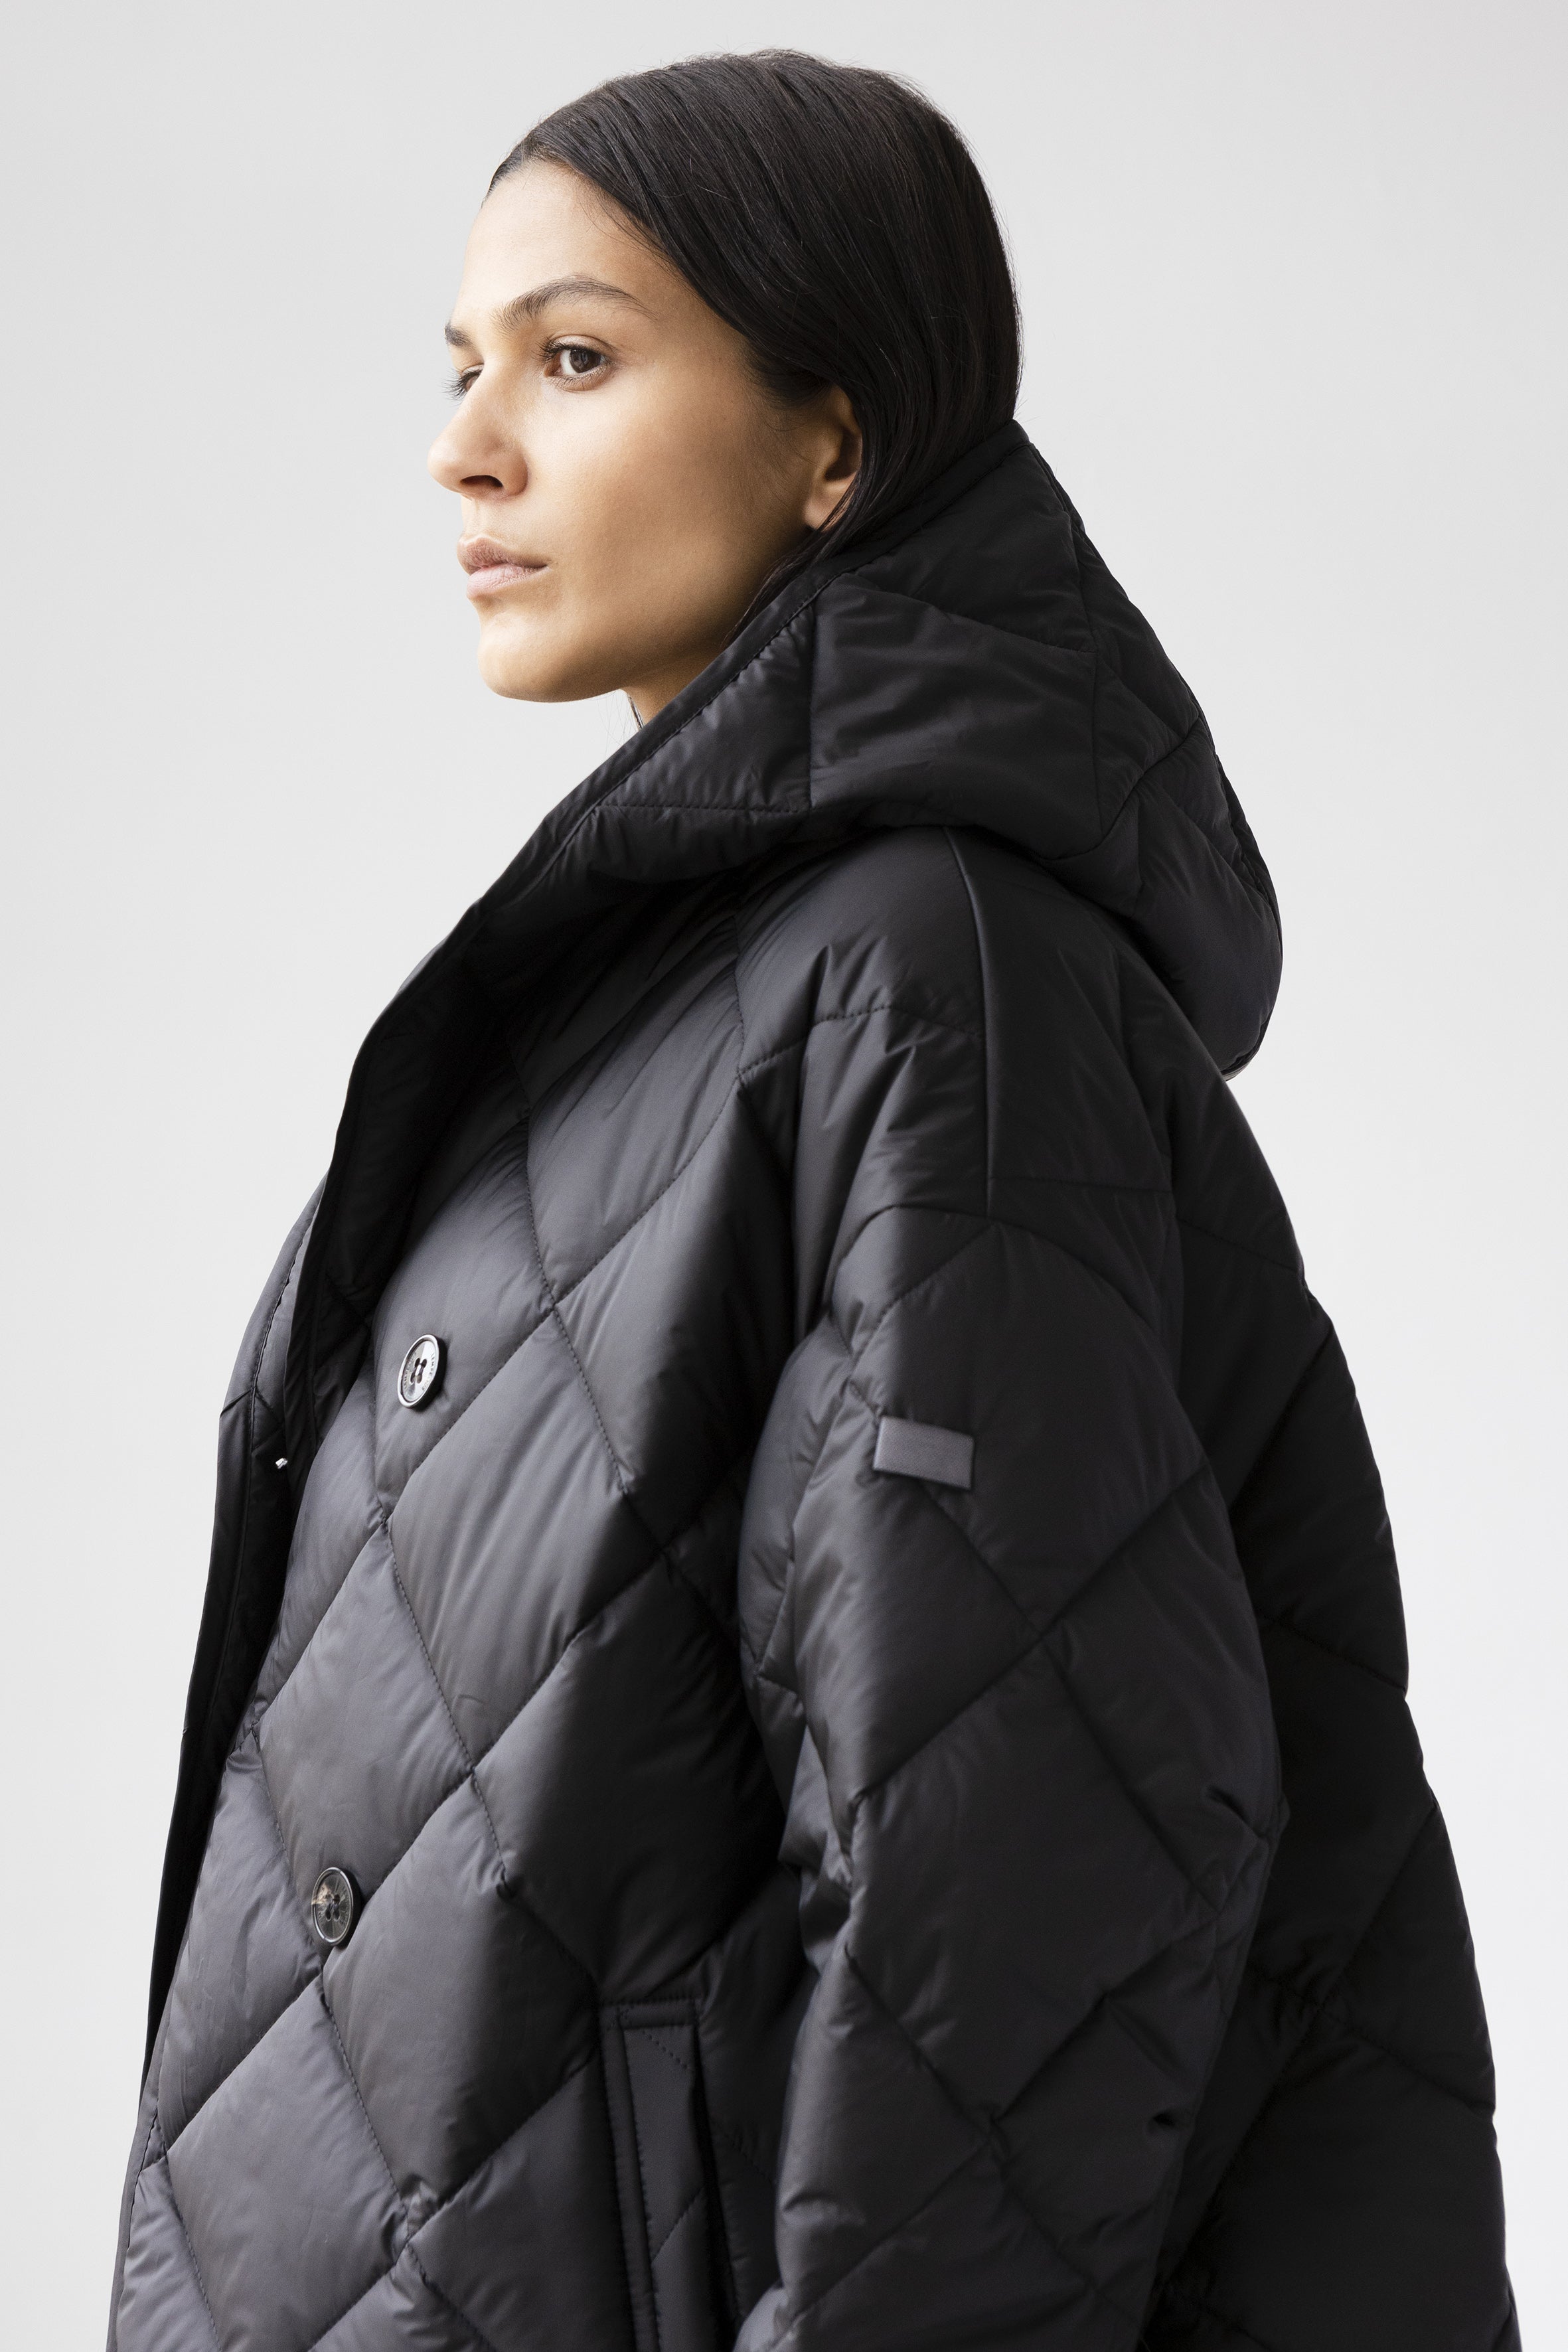 Hooded quilted coat in black